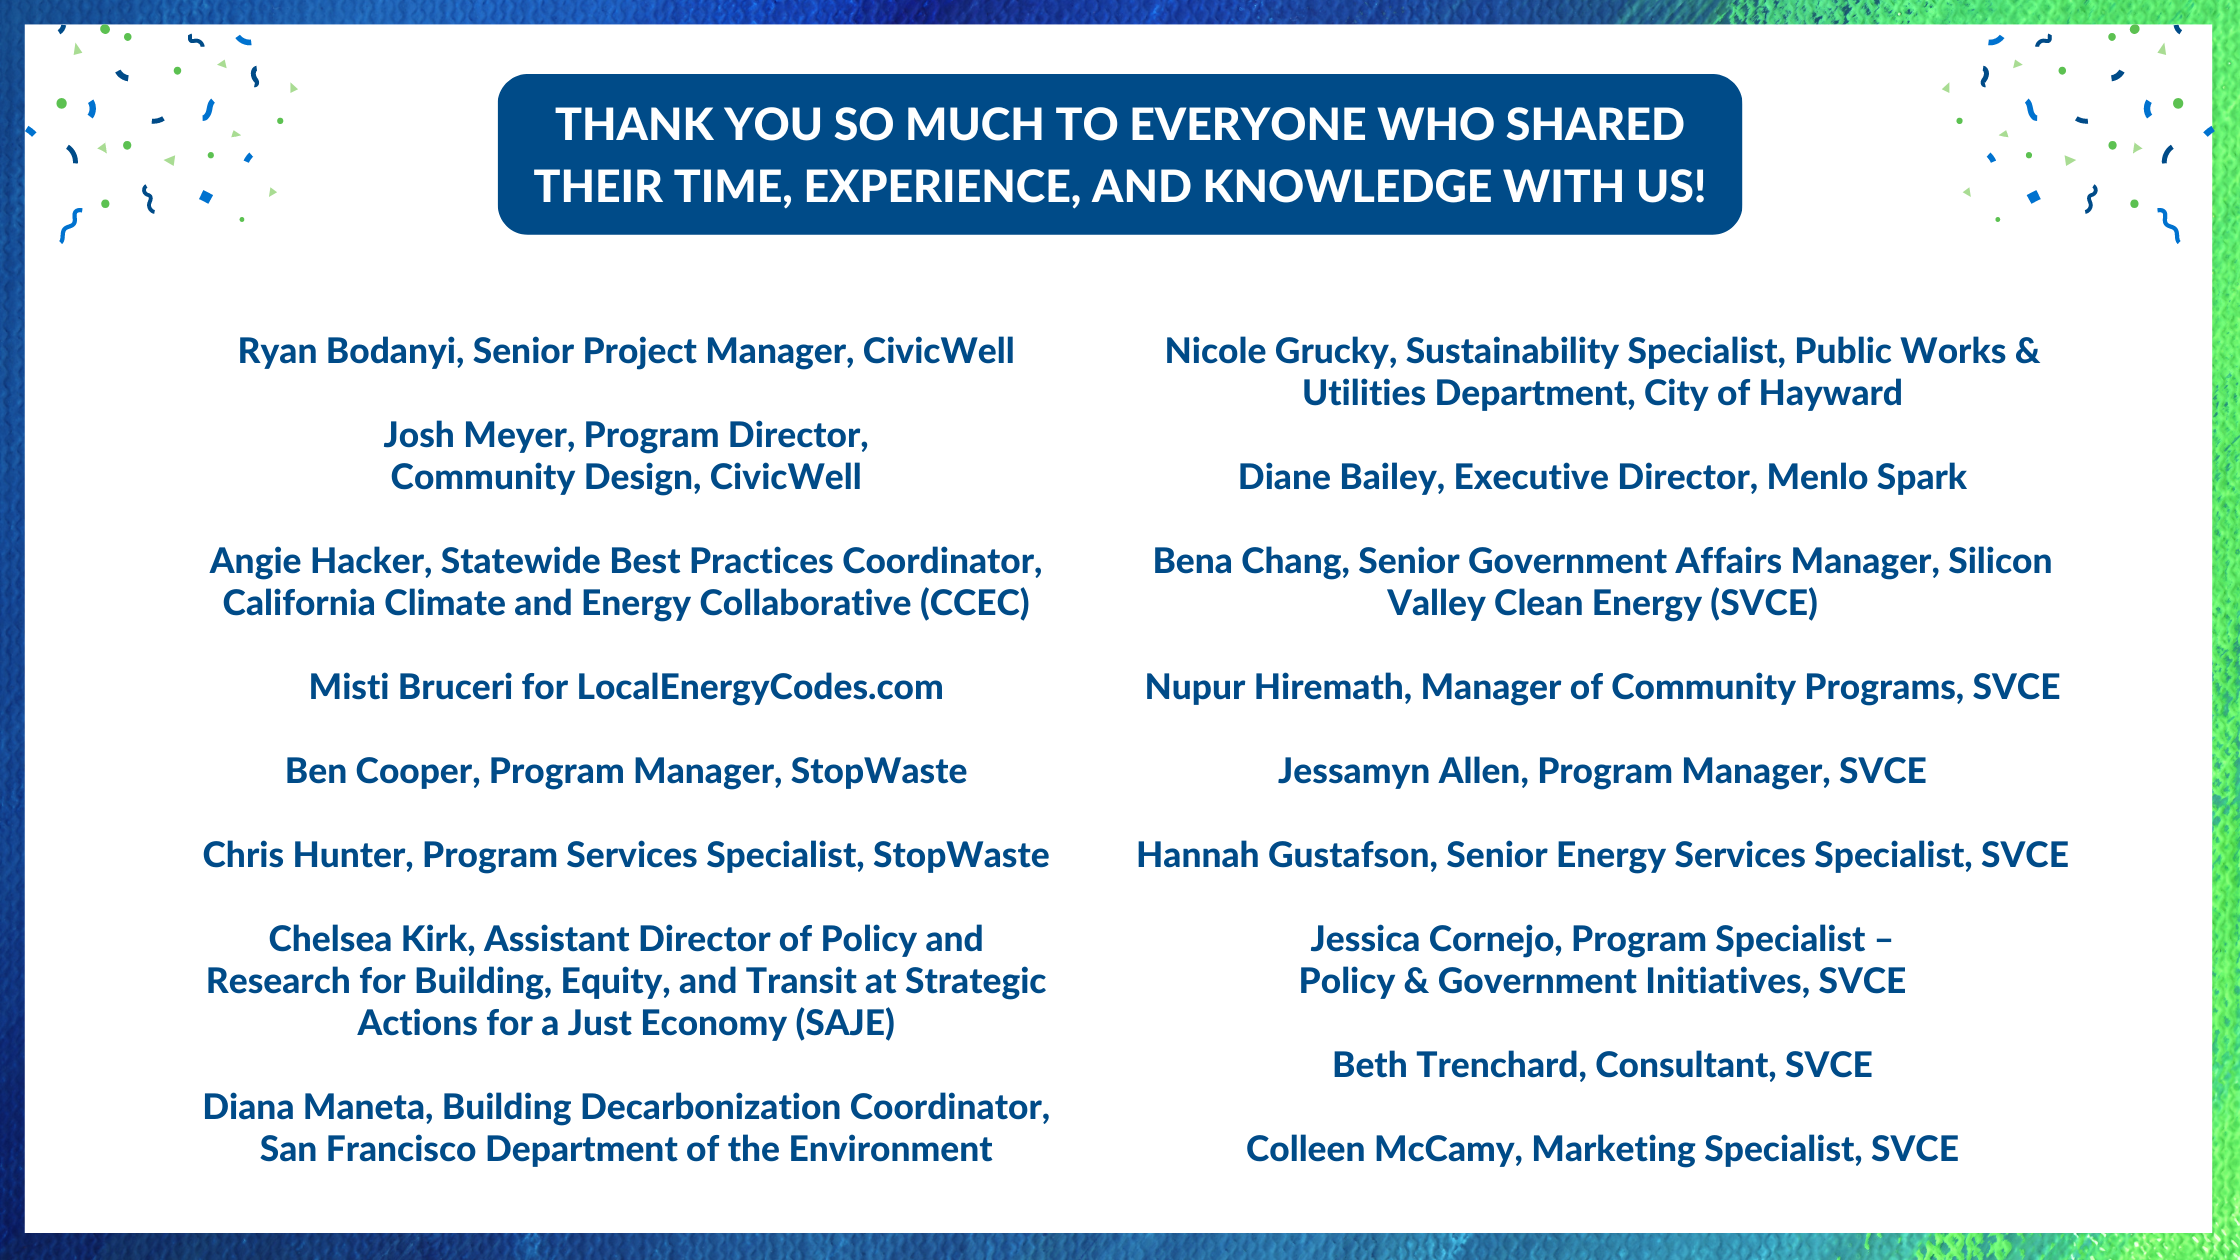 Simple white graphic with a green and blue border. Text in navy blue reads: Thank you so much to everyone who shared their time, experience, and knowledge with us! Ryan Bodanyi, Senior Project Manager, CivicWell | Josh Meyer, Program Director, Community Design, CivicWell | Angie Hacker, Statewide Best Practices Coordinator, California Climate and Energy Collaborative (CCEC) |Misti Bruceri for LocalEnergyCodes.com | Ben Cooper, Program Manager, StopWaste | Chris Hunter, Program Services Specialist, StopWaste | Chelsea Kirk, Assistant Director of Policy and Research for Building, Equity, and Transit at Strategic Actions for a Just Economy (SAJE) | Diana Maneta, Building Decarbonization Coordinator, San Francisco Department of the Environment | Nicole Grucky, Sustainability Specialist, Public Works & Utilities Department, City of Hayward |Diane Bailey, Executive Director, Menlo Spark | Bena Chang, Senior Government Affairs Manager, Silicon Valley Clean Energy (SVCE) | Nupur Hiremath, Manager of Community Programs, SVCE | Jessamyn Allen, Program Manager, SVCE | Hannah Gustafson, Senior Energy Services Specialist, SVCE | Jessica Cornejo, Program Specialist – Policy & Government Initiatives, SVCE | Beth Trenchard, Consultant, SVCE | Colleen McCamy, Marketing Specialist, SVCE